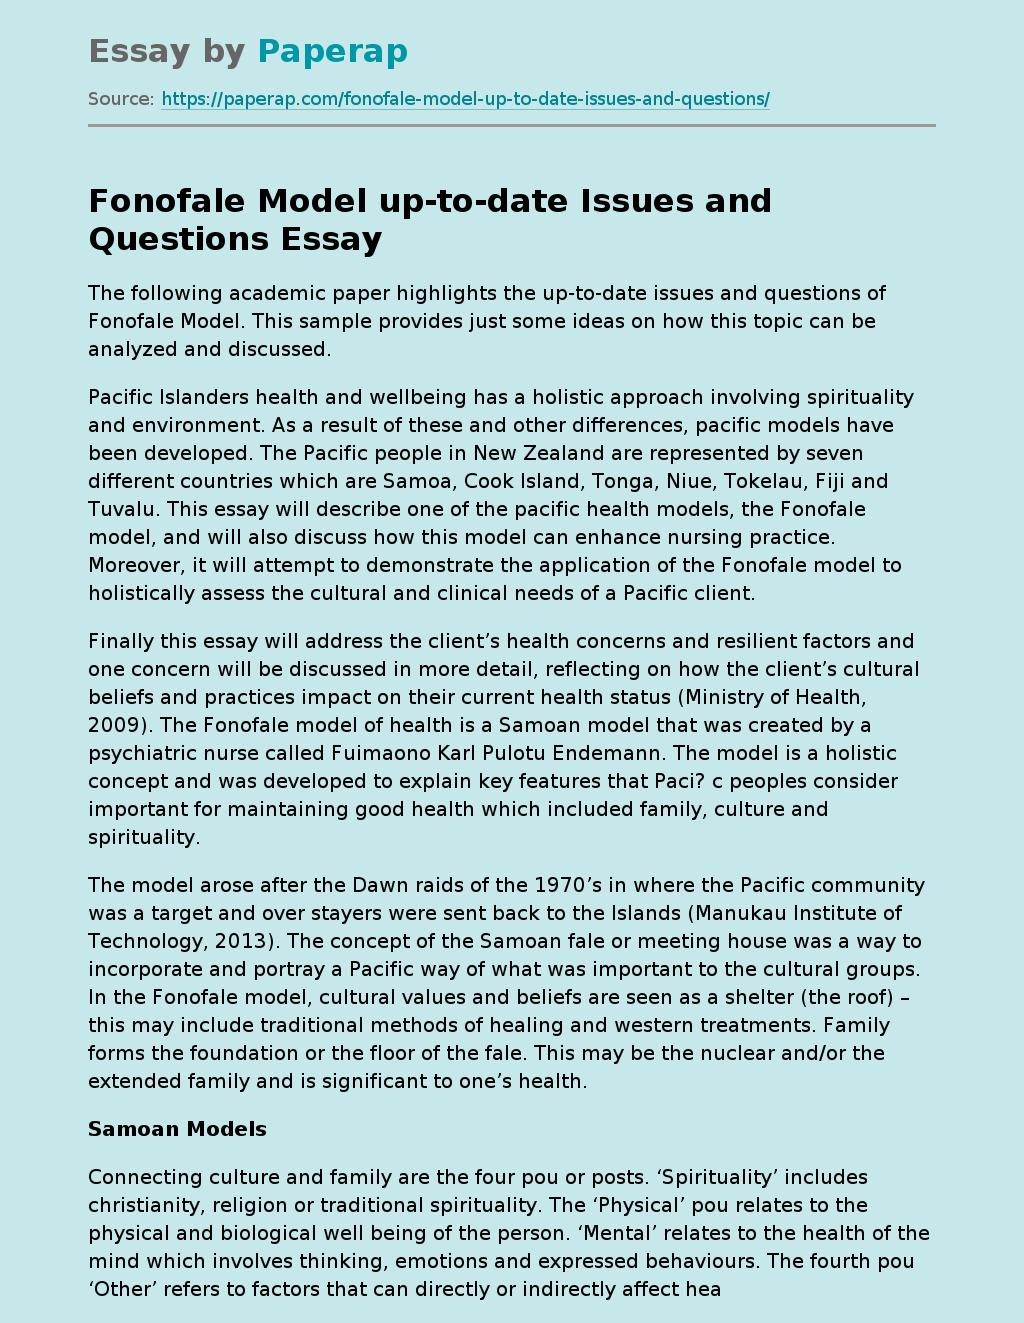 Fonofale Model up-to-date Issues and Questions